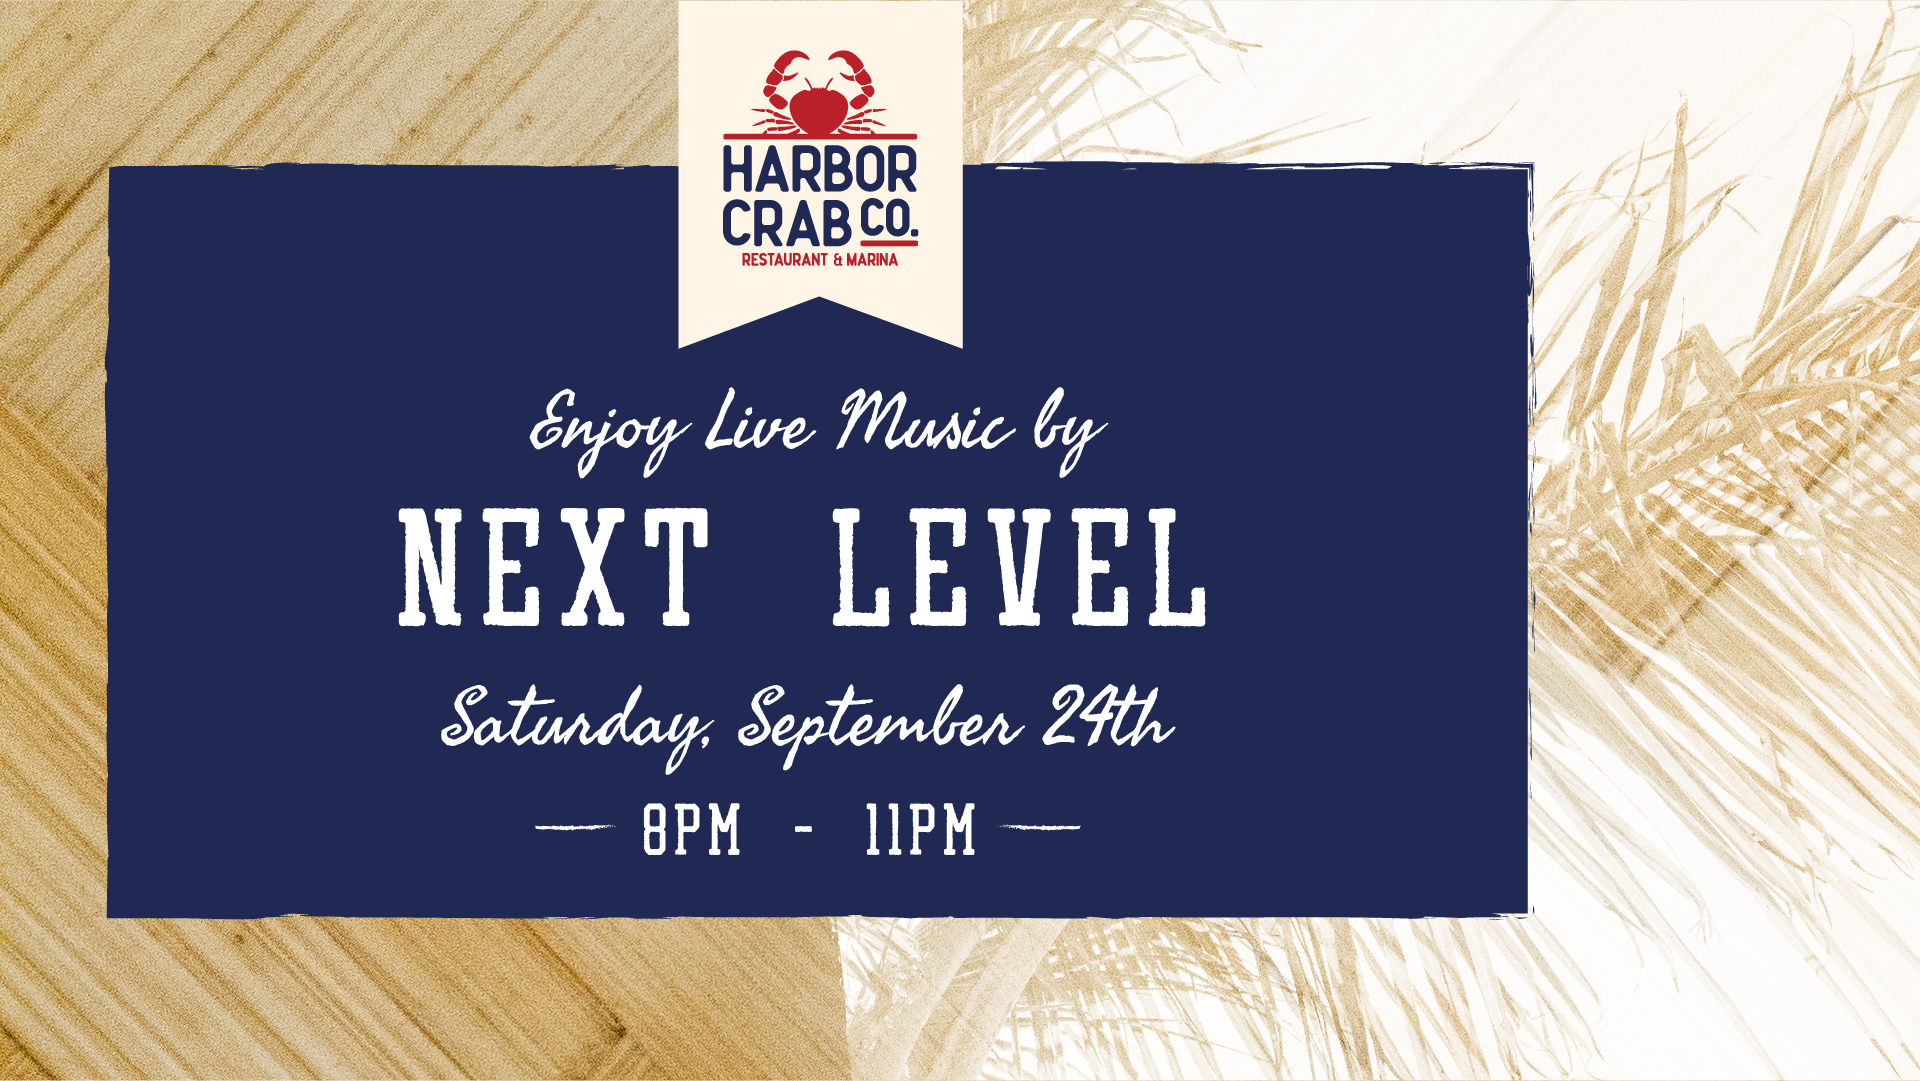 Flyer for Next Level on Saturday, September 24th